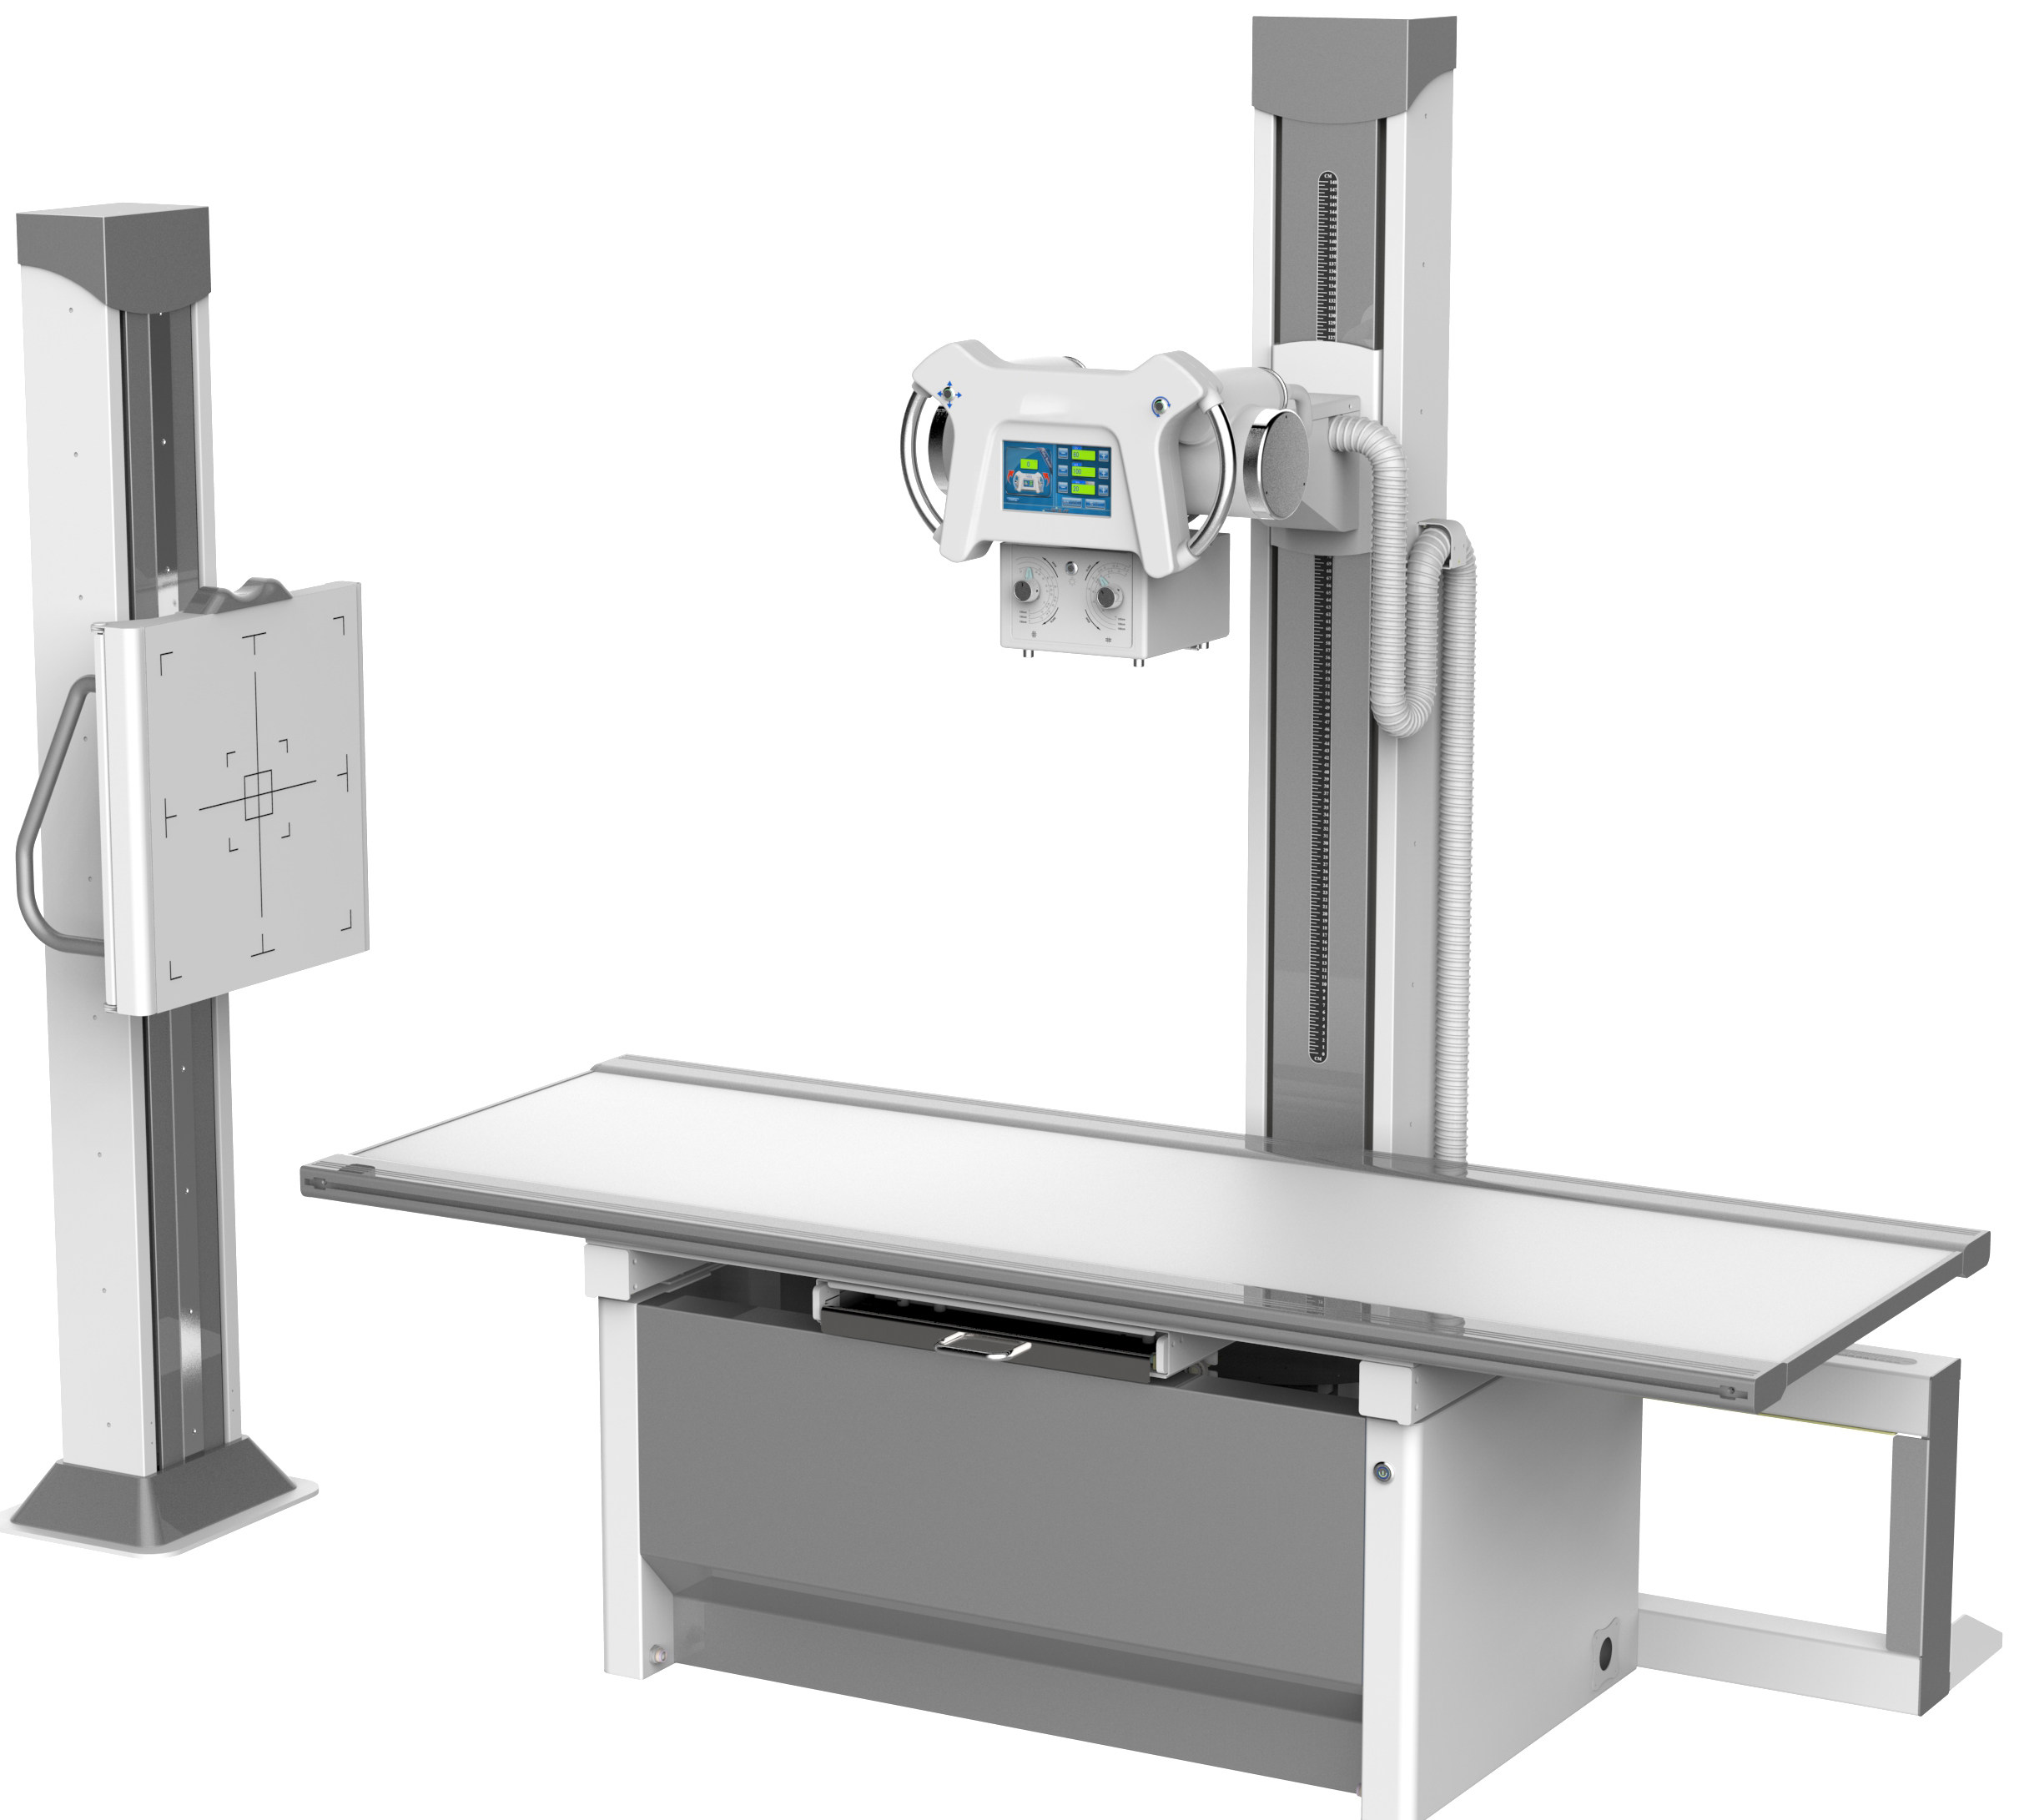 Floor-mounted Digital Radiography System